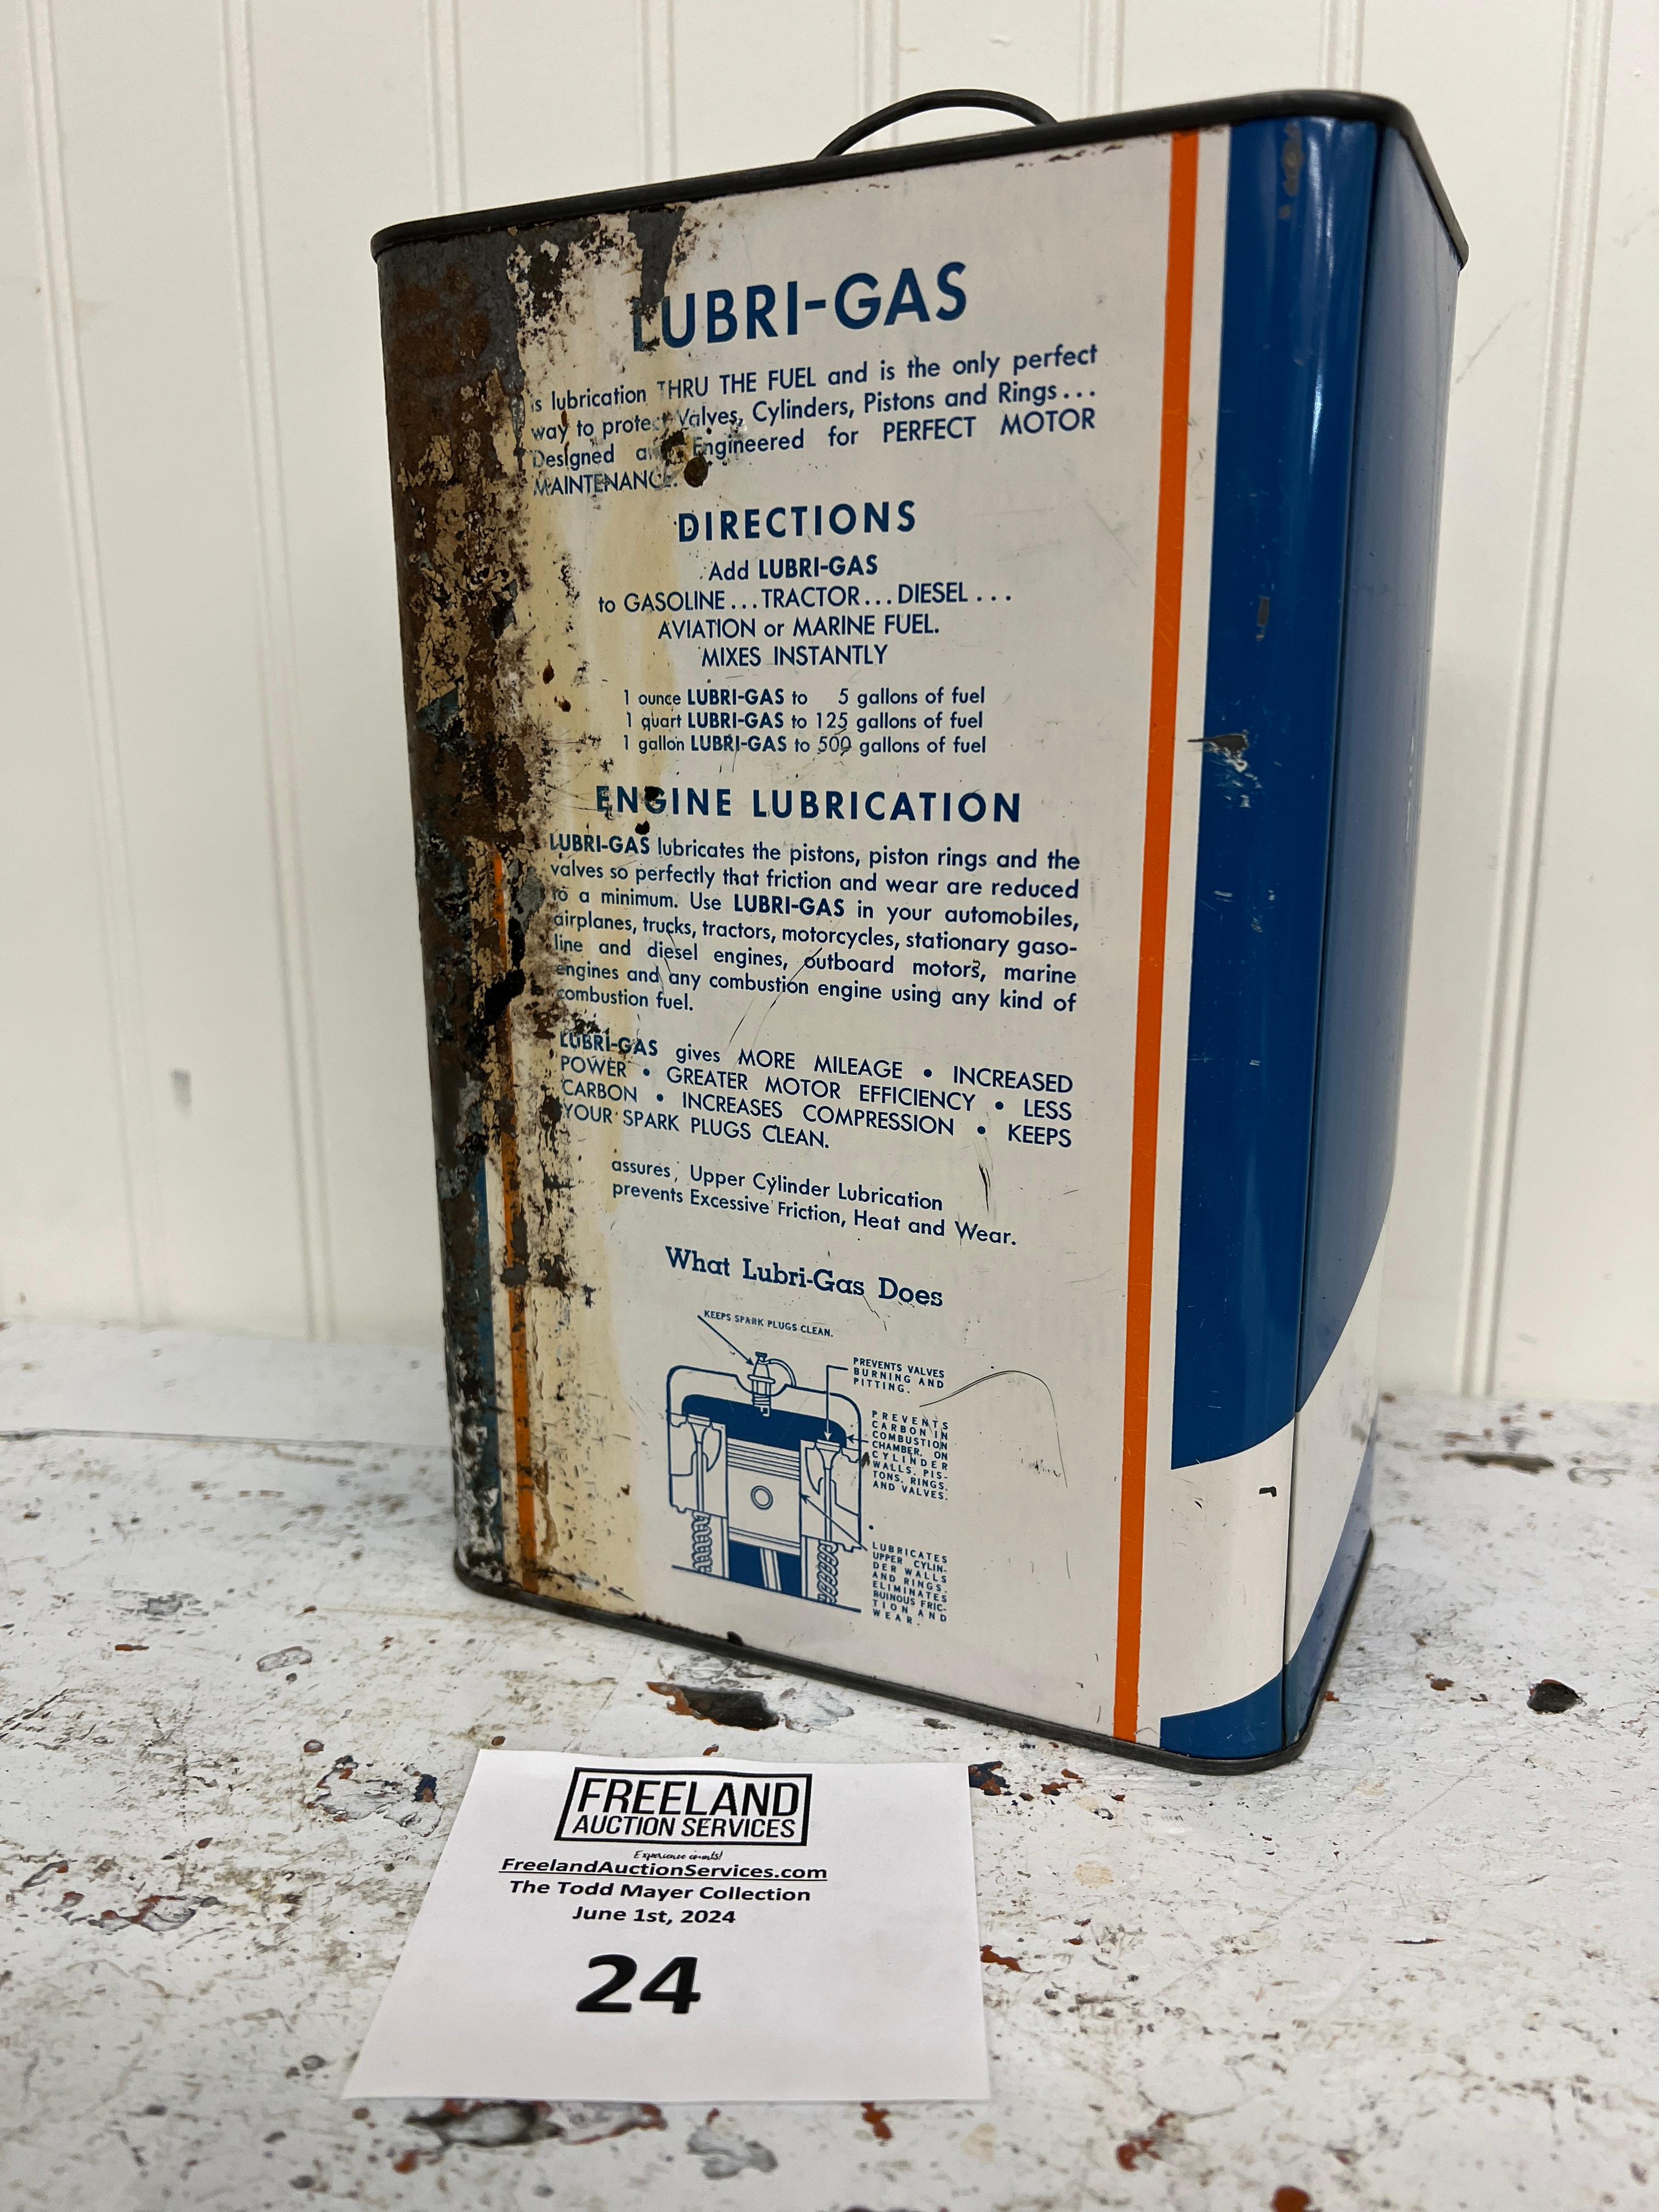 Lubri-Gas one gallon advertising can with CAMEL logo